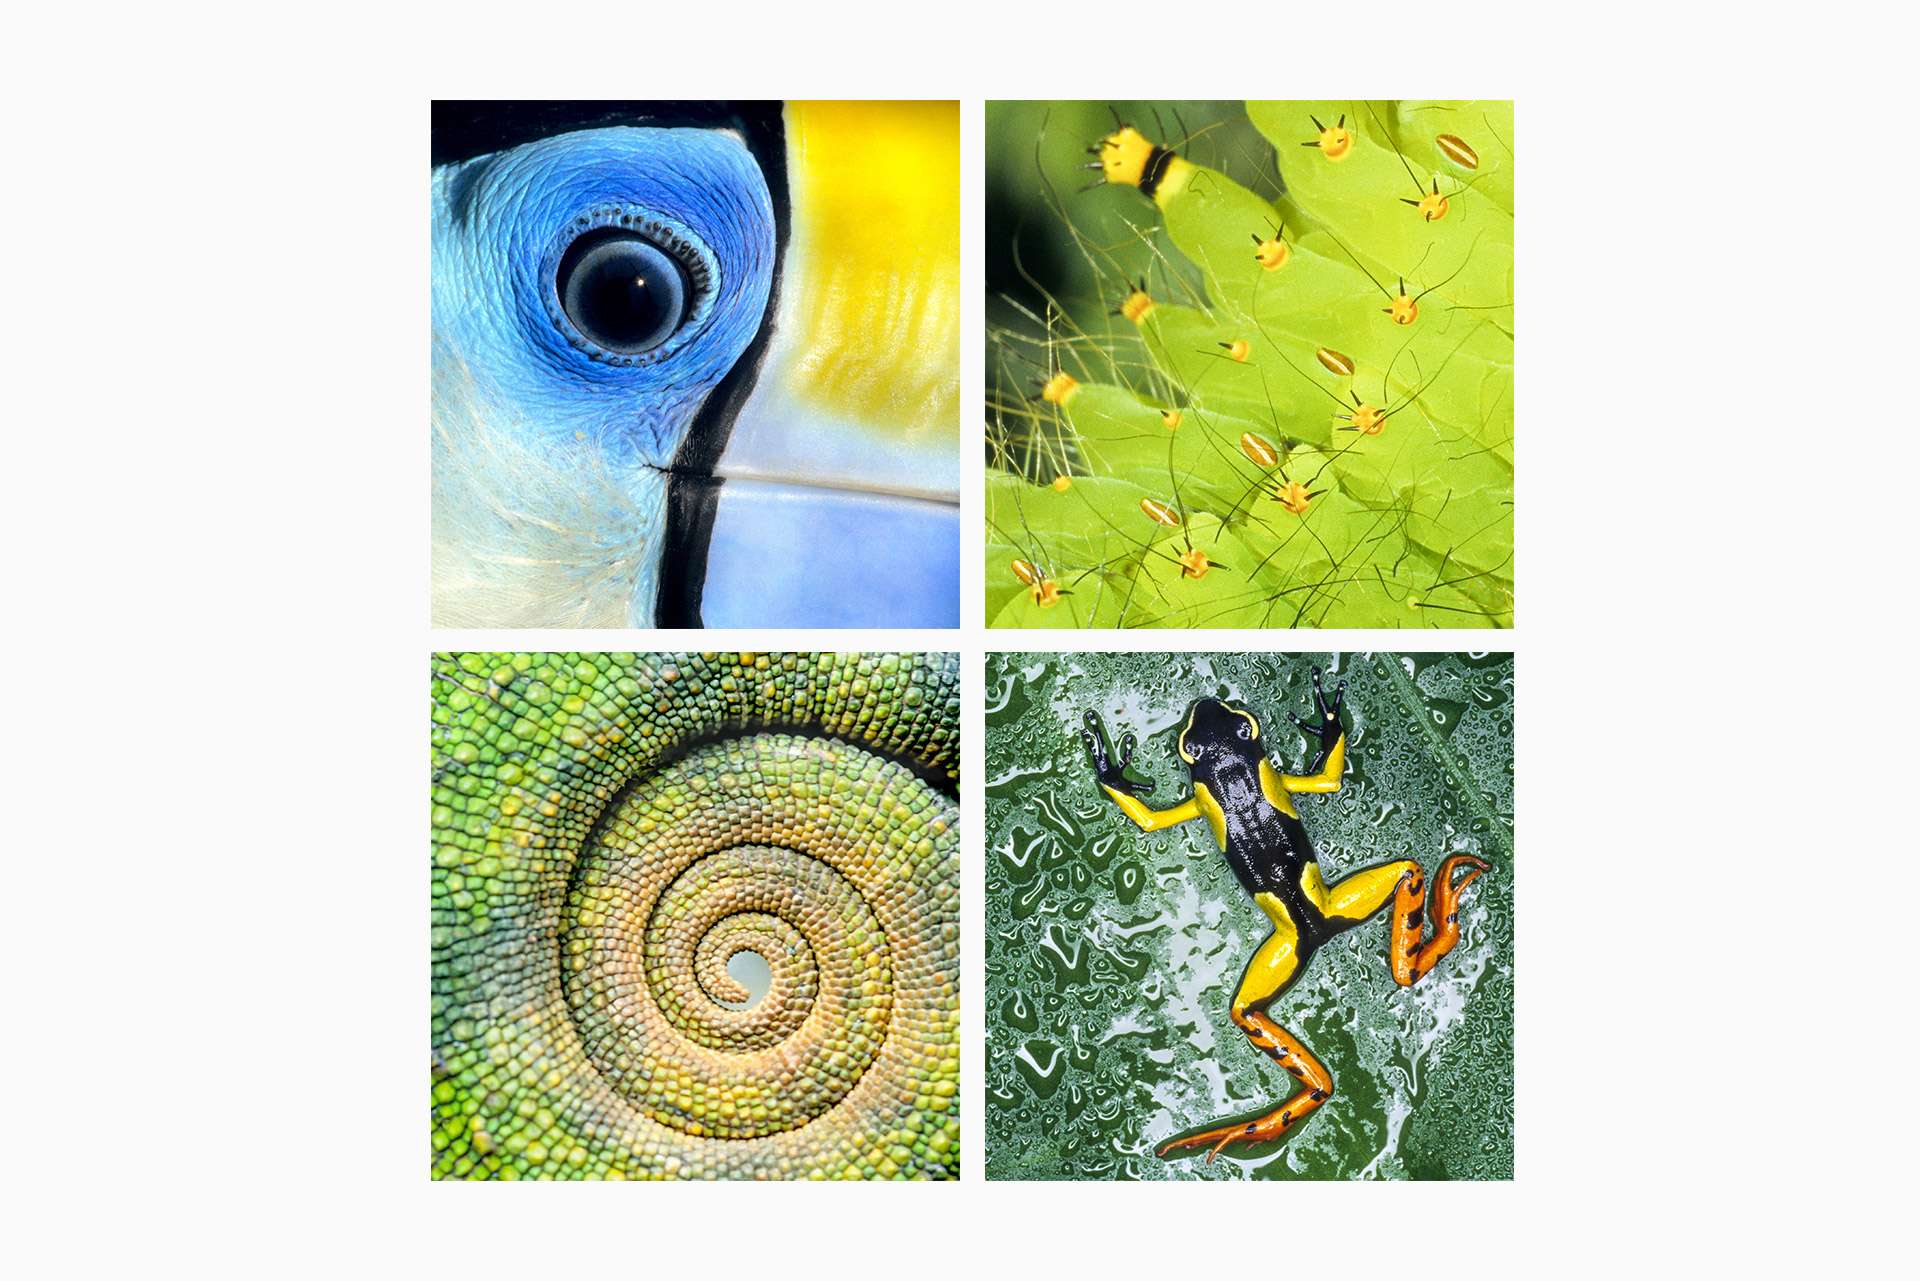 Gilles Martin's photo-montage from Tropical rainforest 